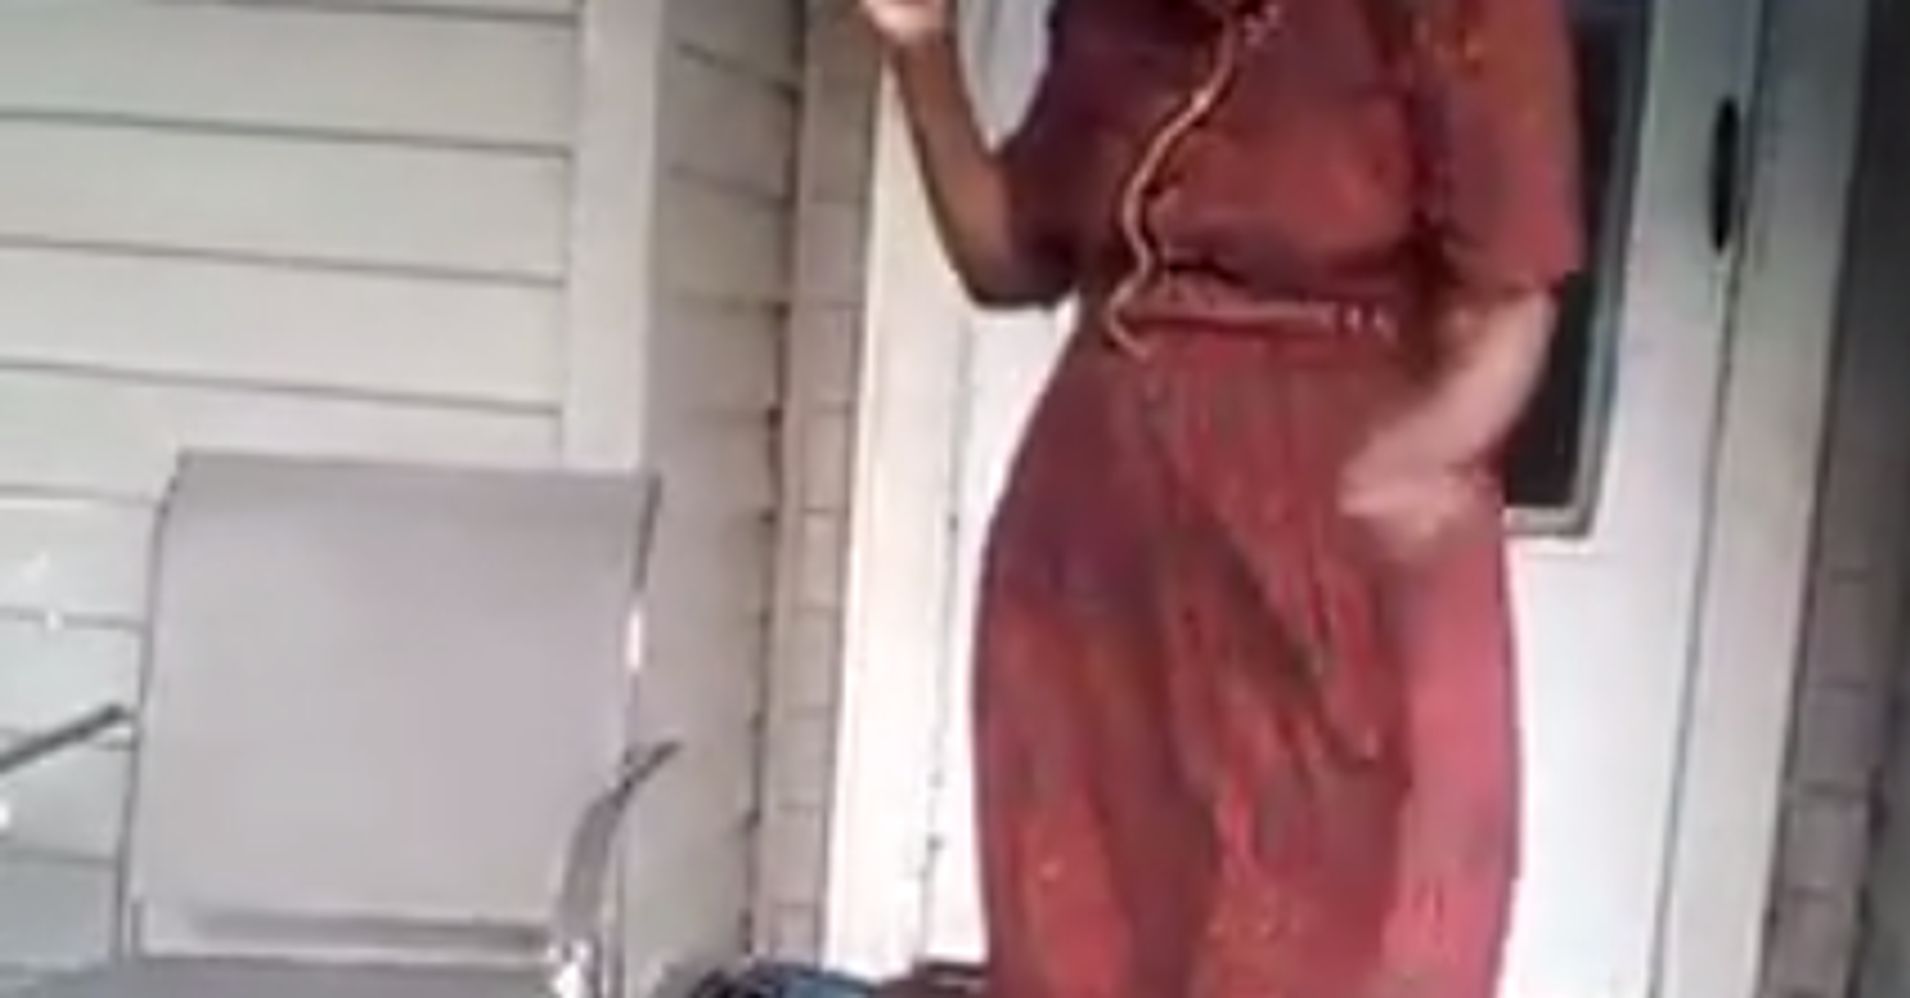 Dancing Texas Granny Becomes Unlikely Internet Sensation Huffpost 4354